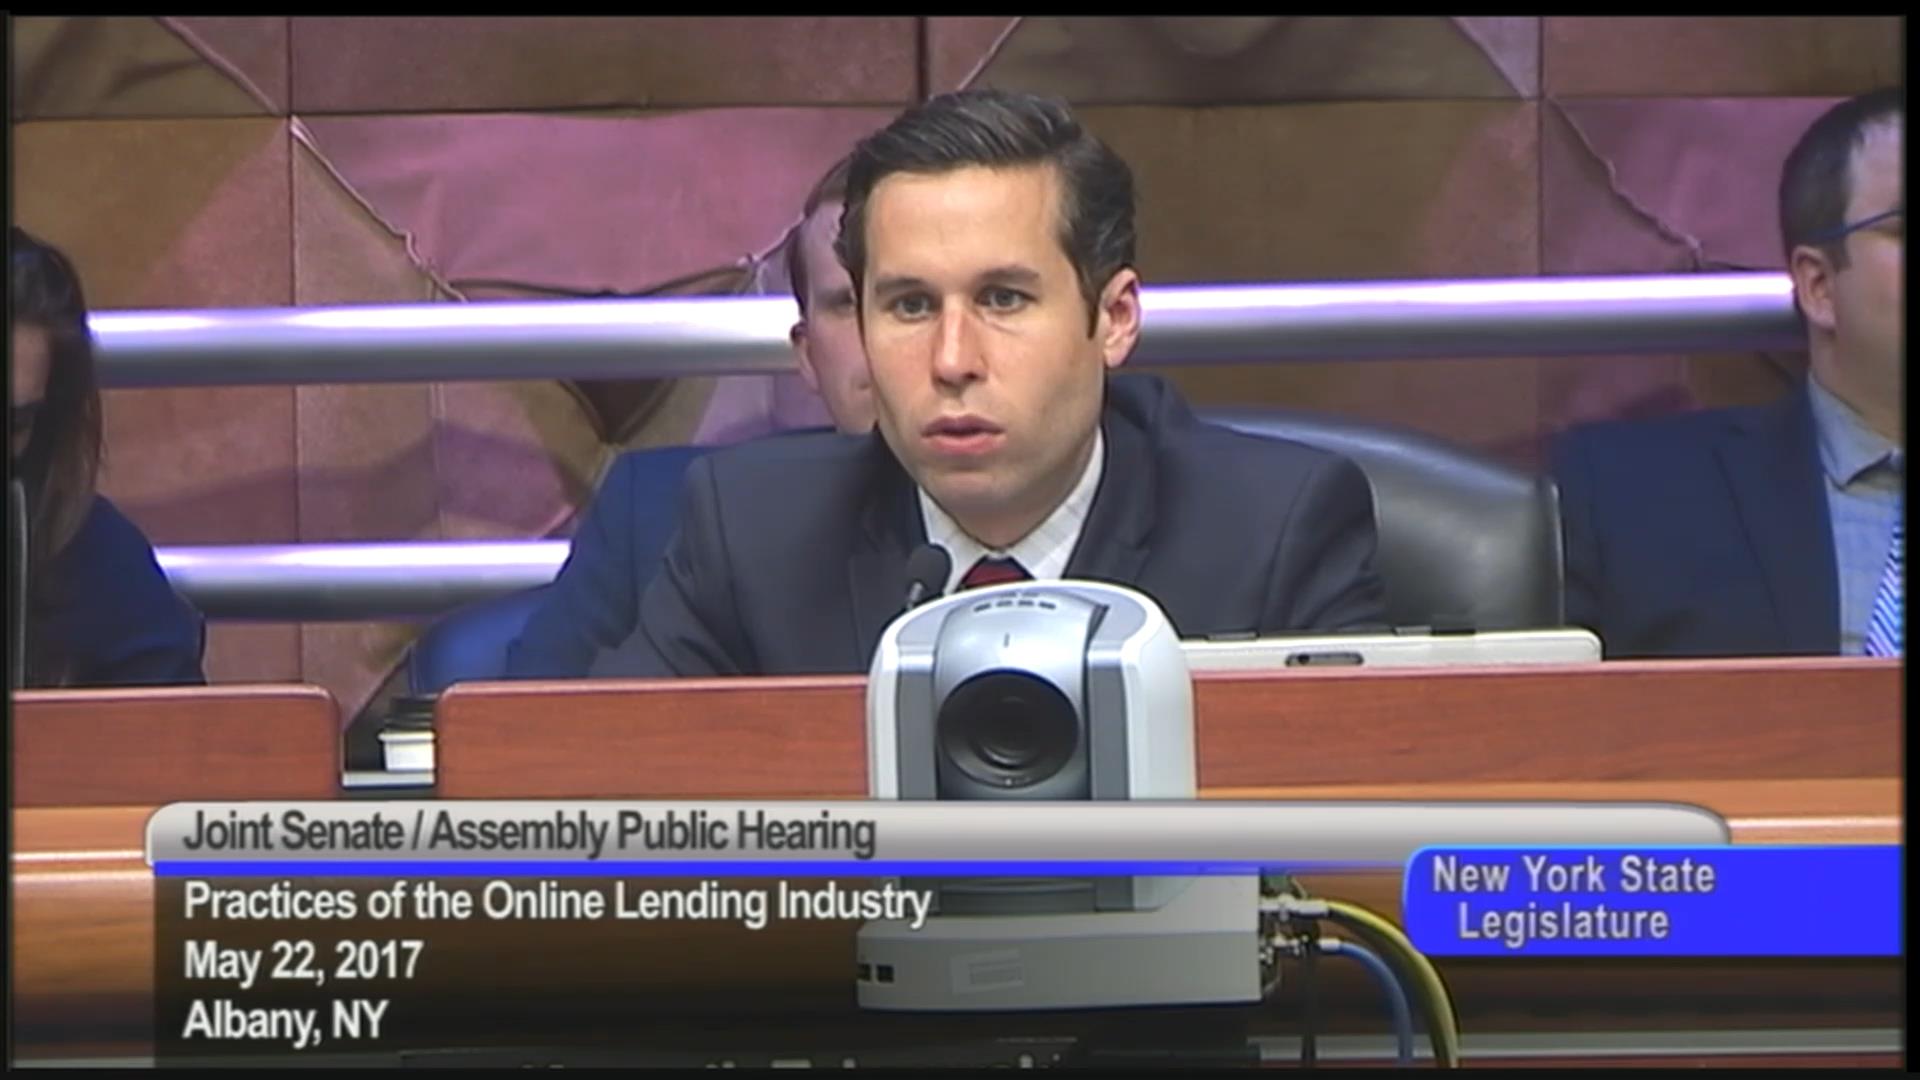 Questions at Online Lending Industry Hearing